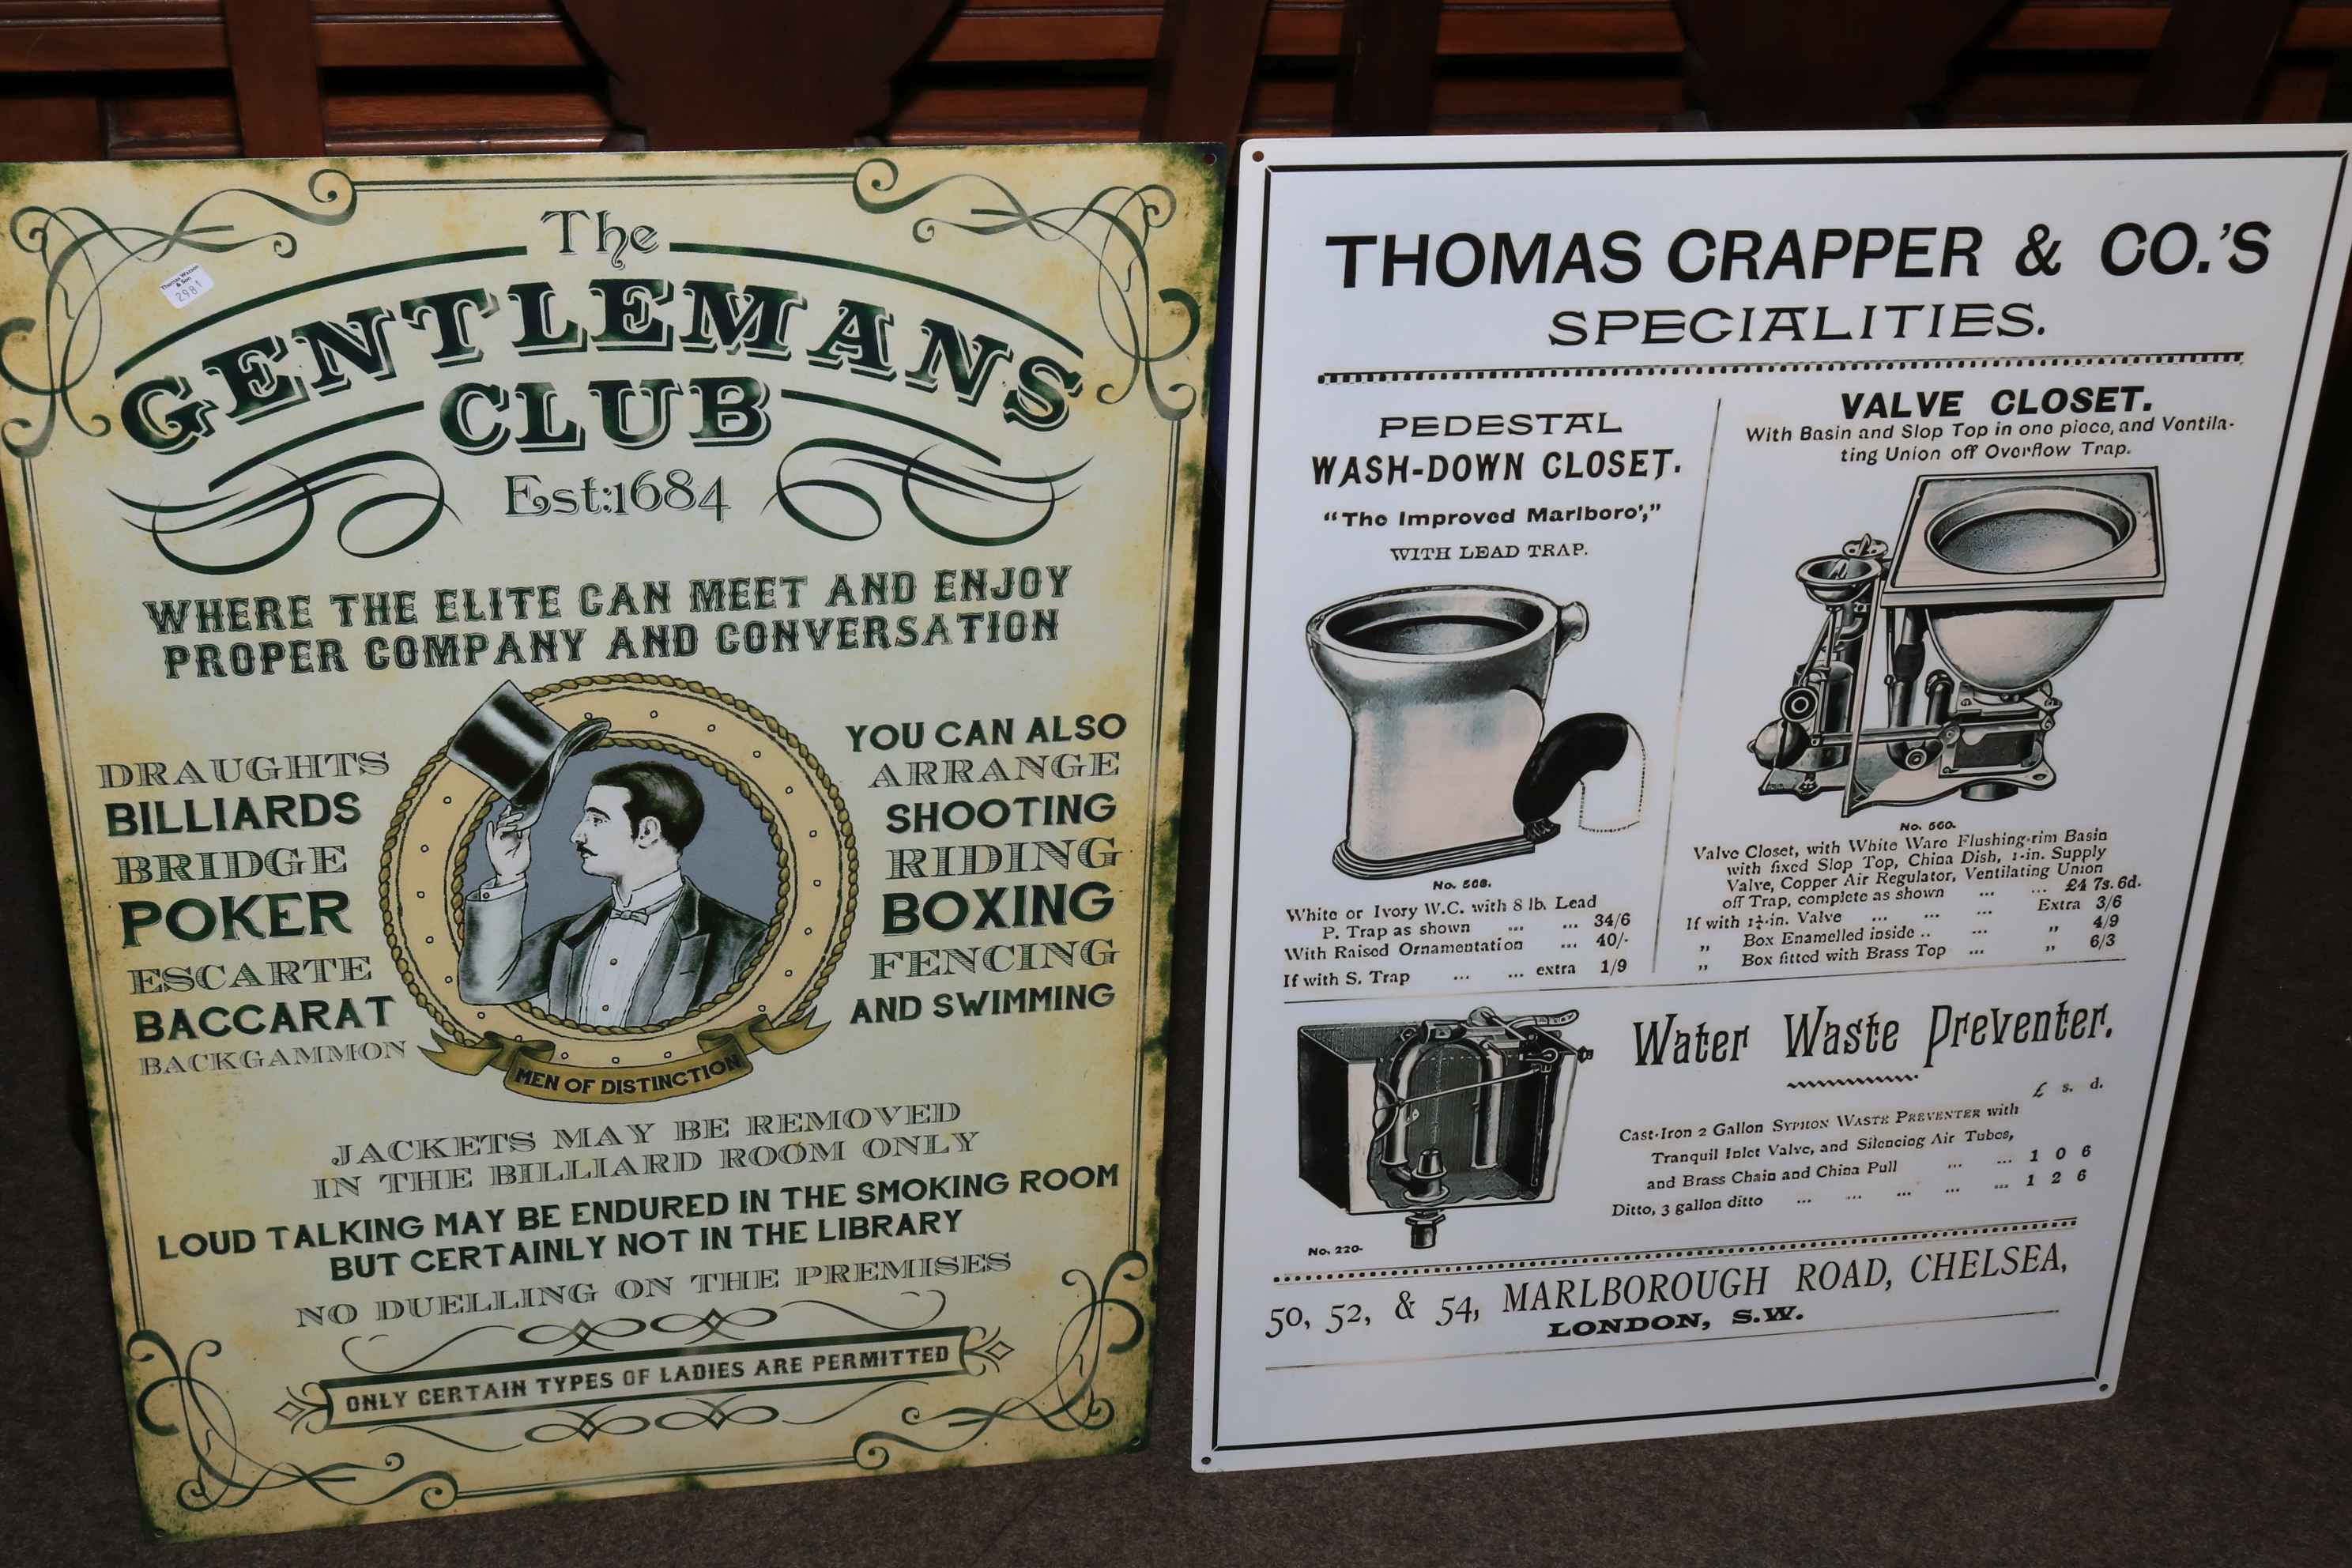 Two advert signs 'The Gentlemen's Club' and 'Thomas Crapper and Co's'.